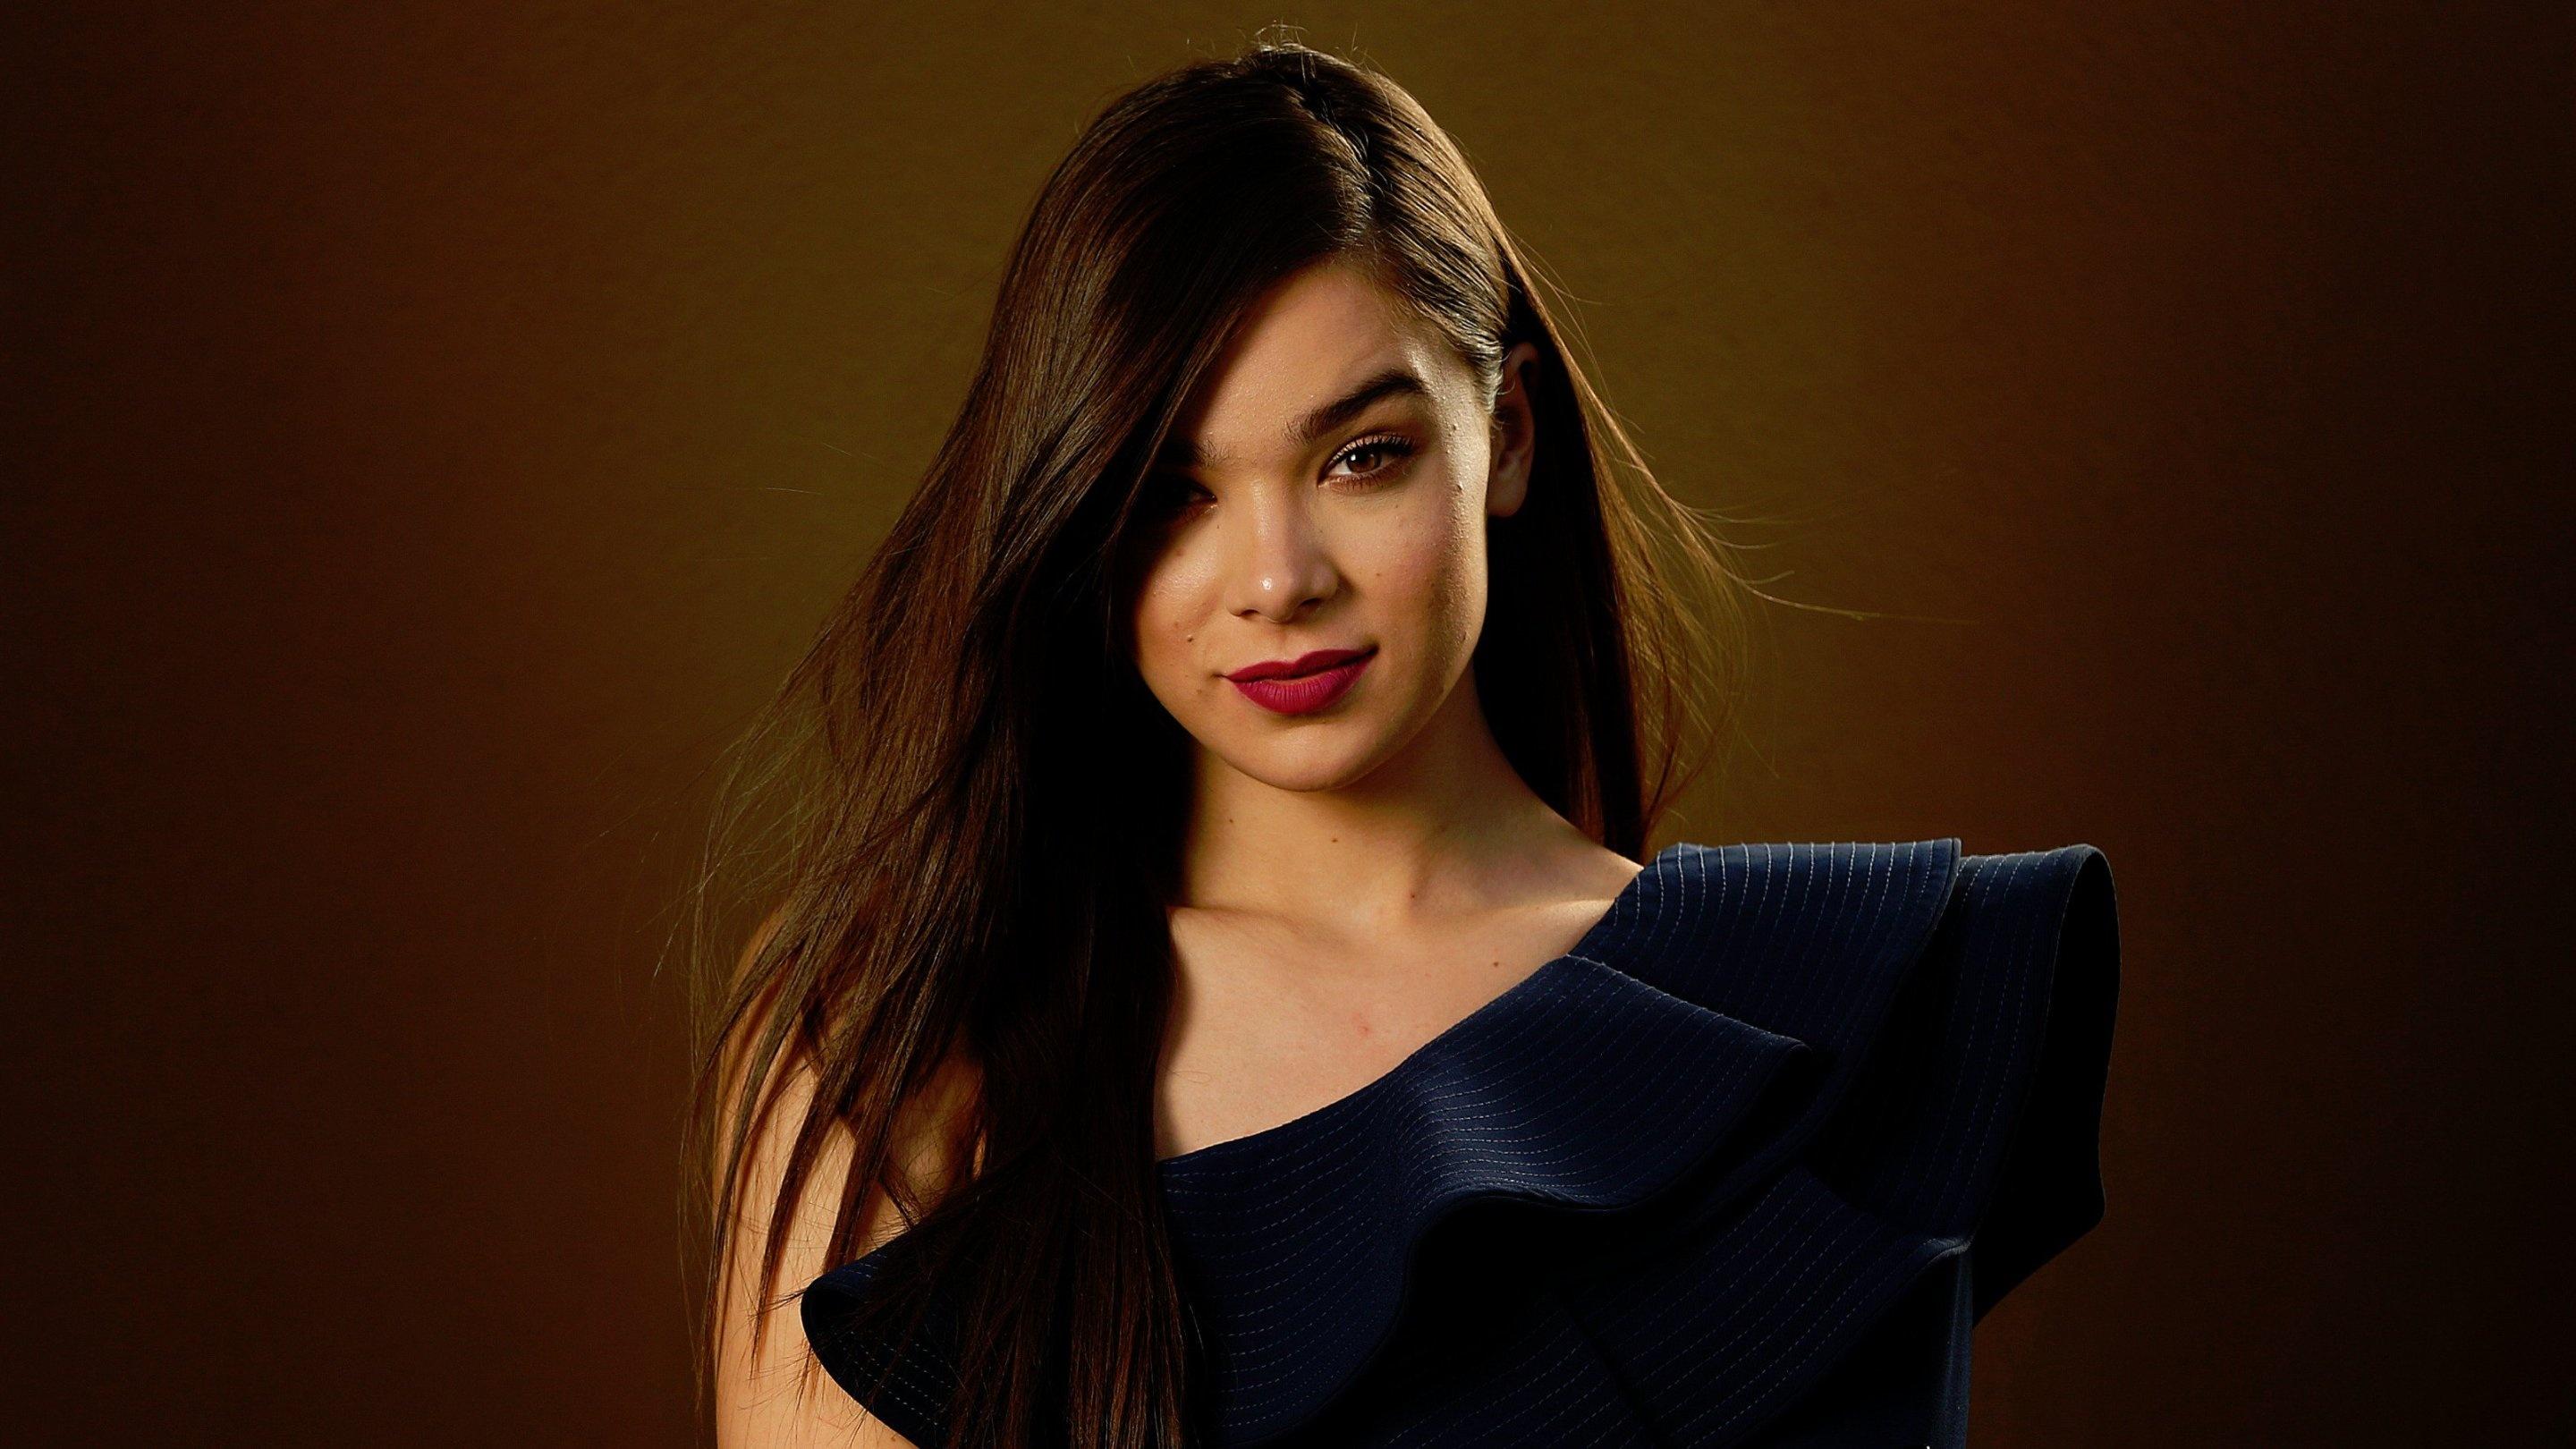 hailee 4K wallpaper for your desktop or mobile screen free and easy